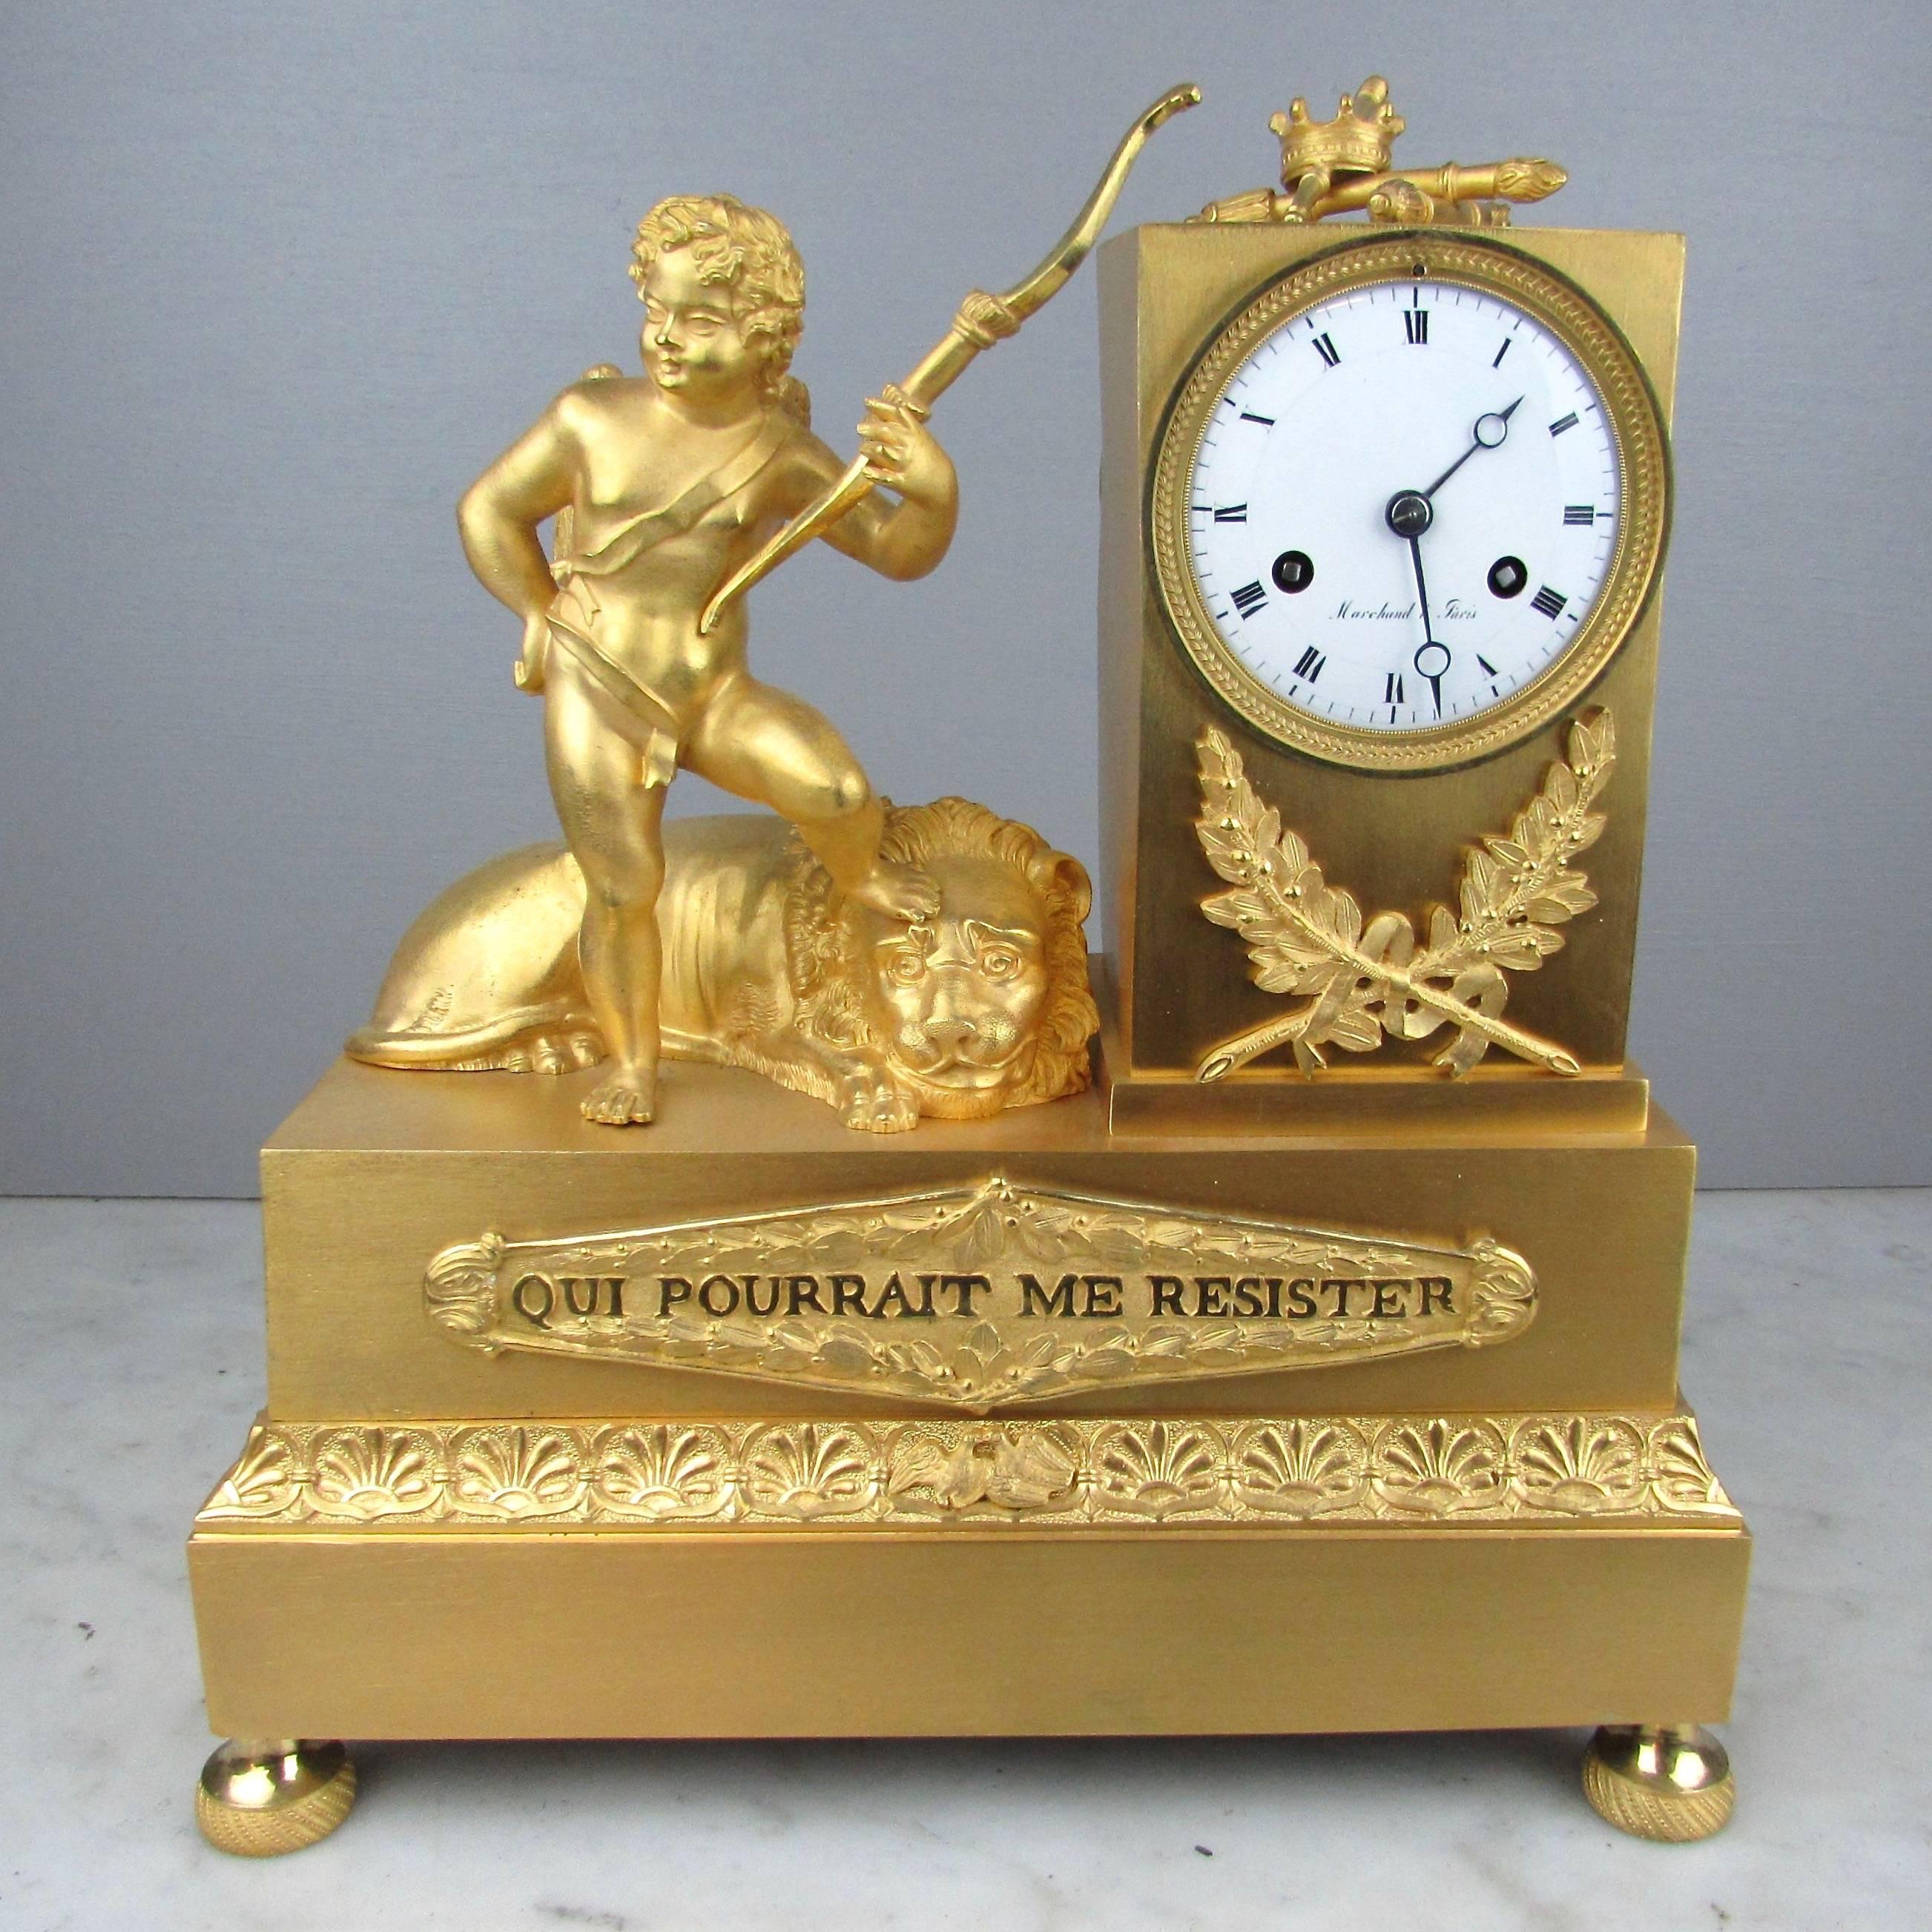 A very fine early 19th century gilded French classical design mantel clock, newly serviced in excellent working order. The case features a beautiful winged cherub holding a bow, standing next to a lion. The front of the case features a gilt plaque